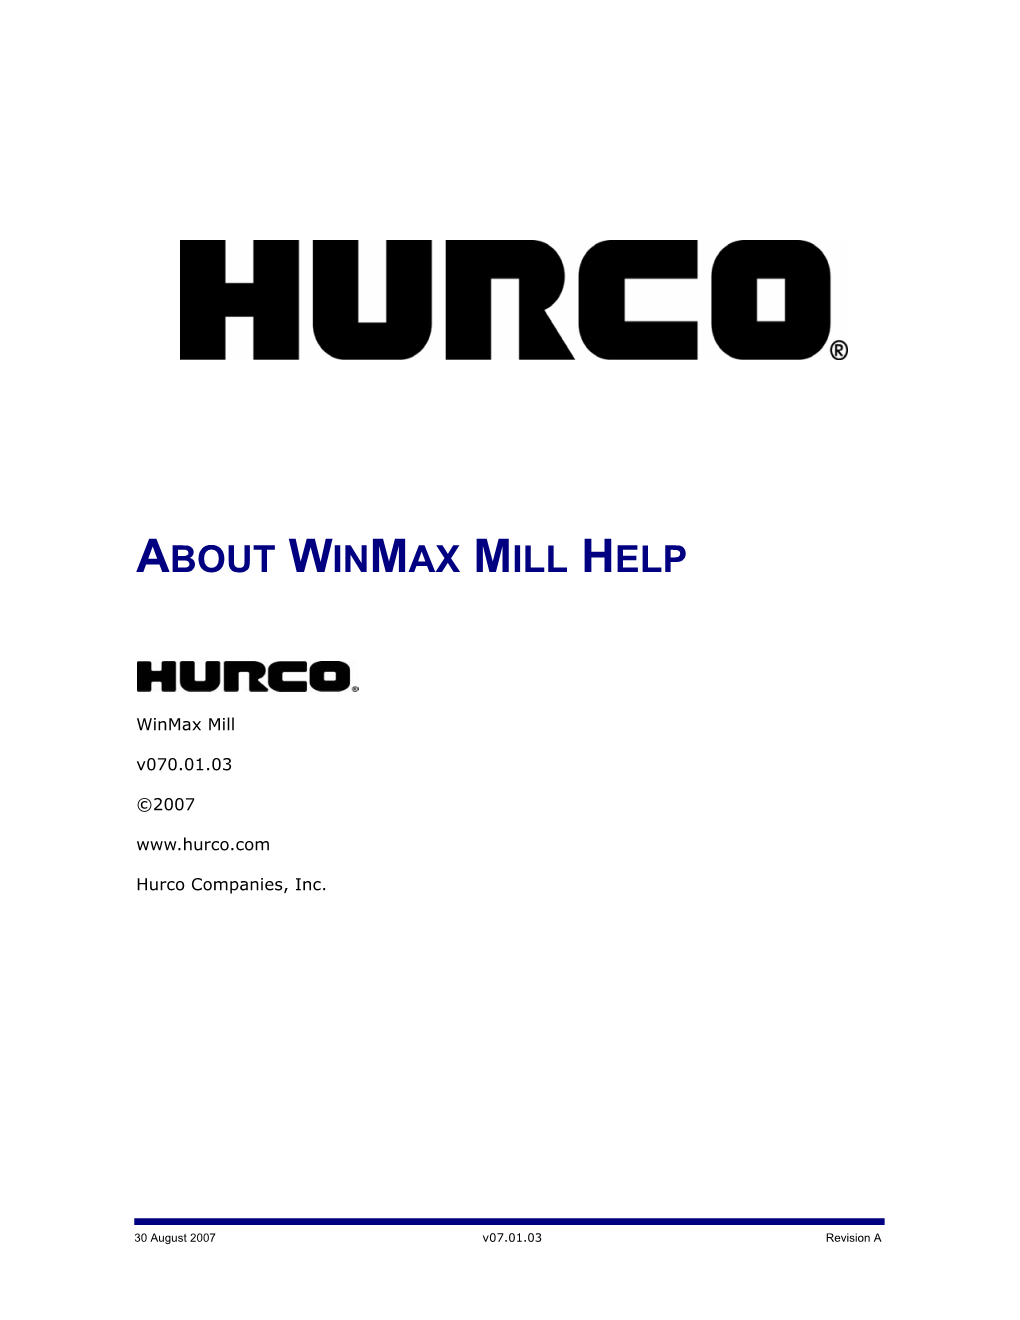 About Winmax Mill Help